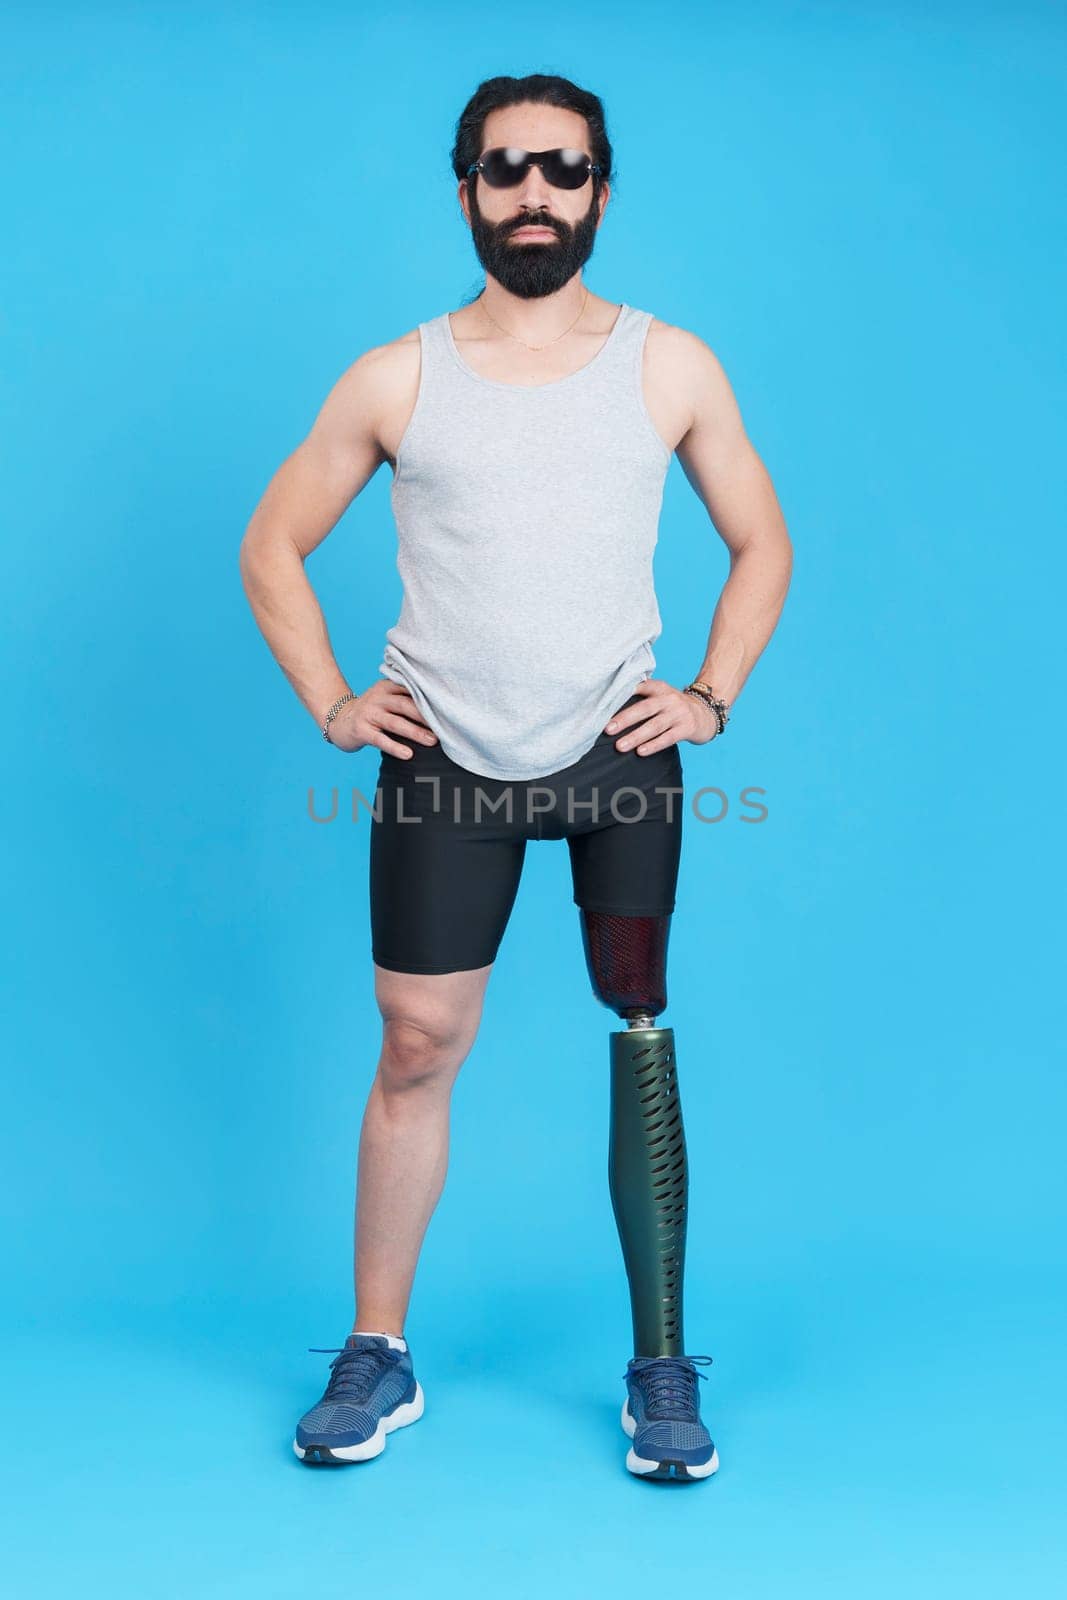 Vertical Studio portrait with blue background of a sportive stylish man with sunglasses standing with a prosthetic leg